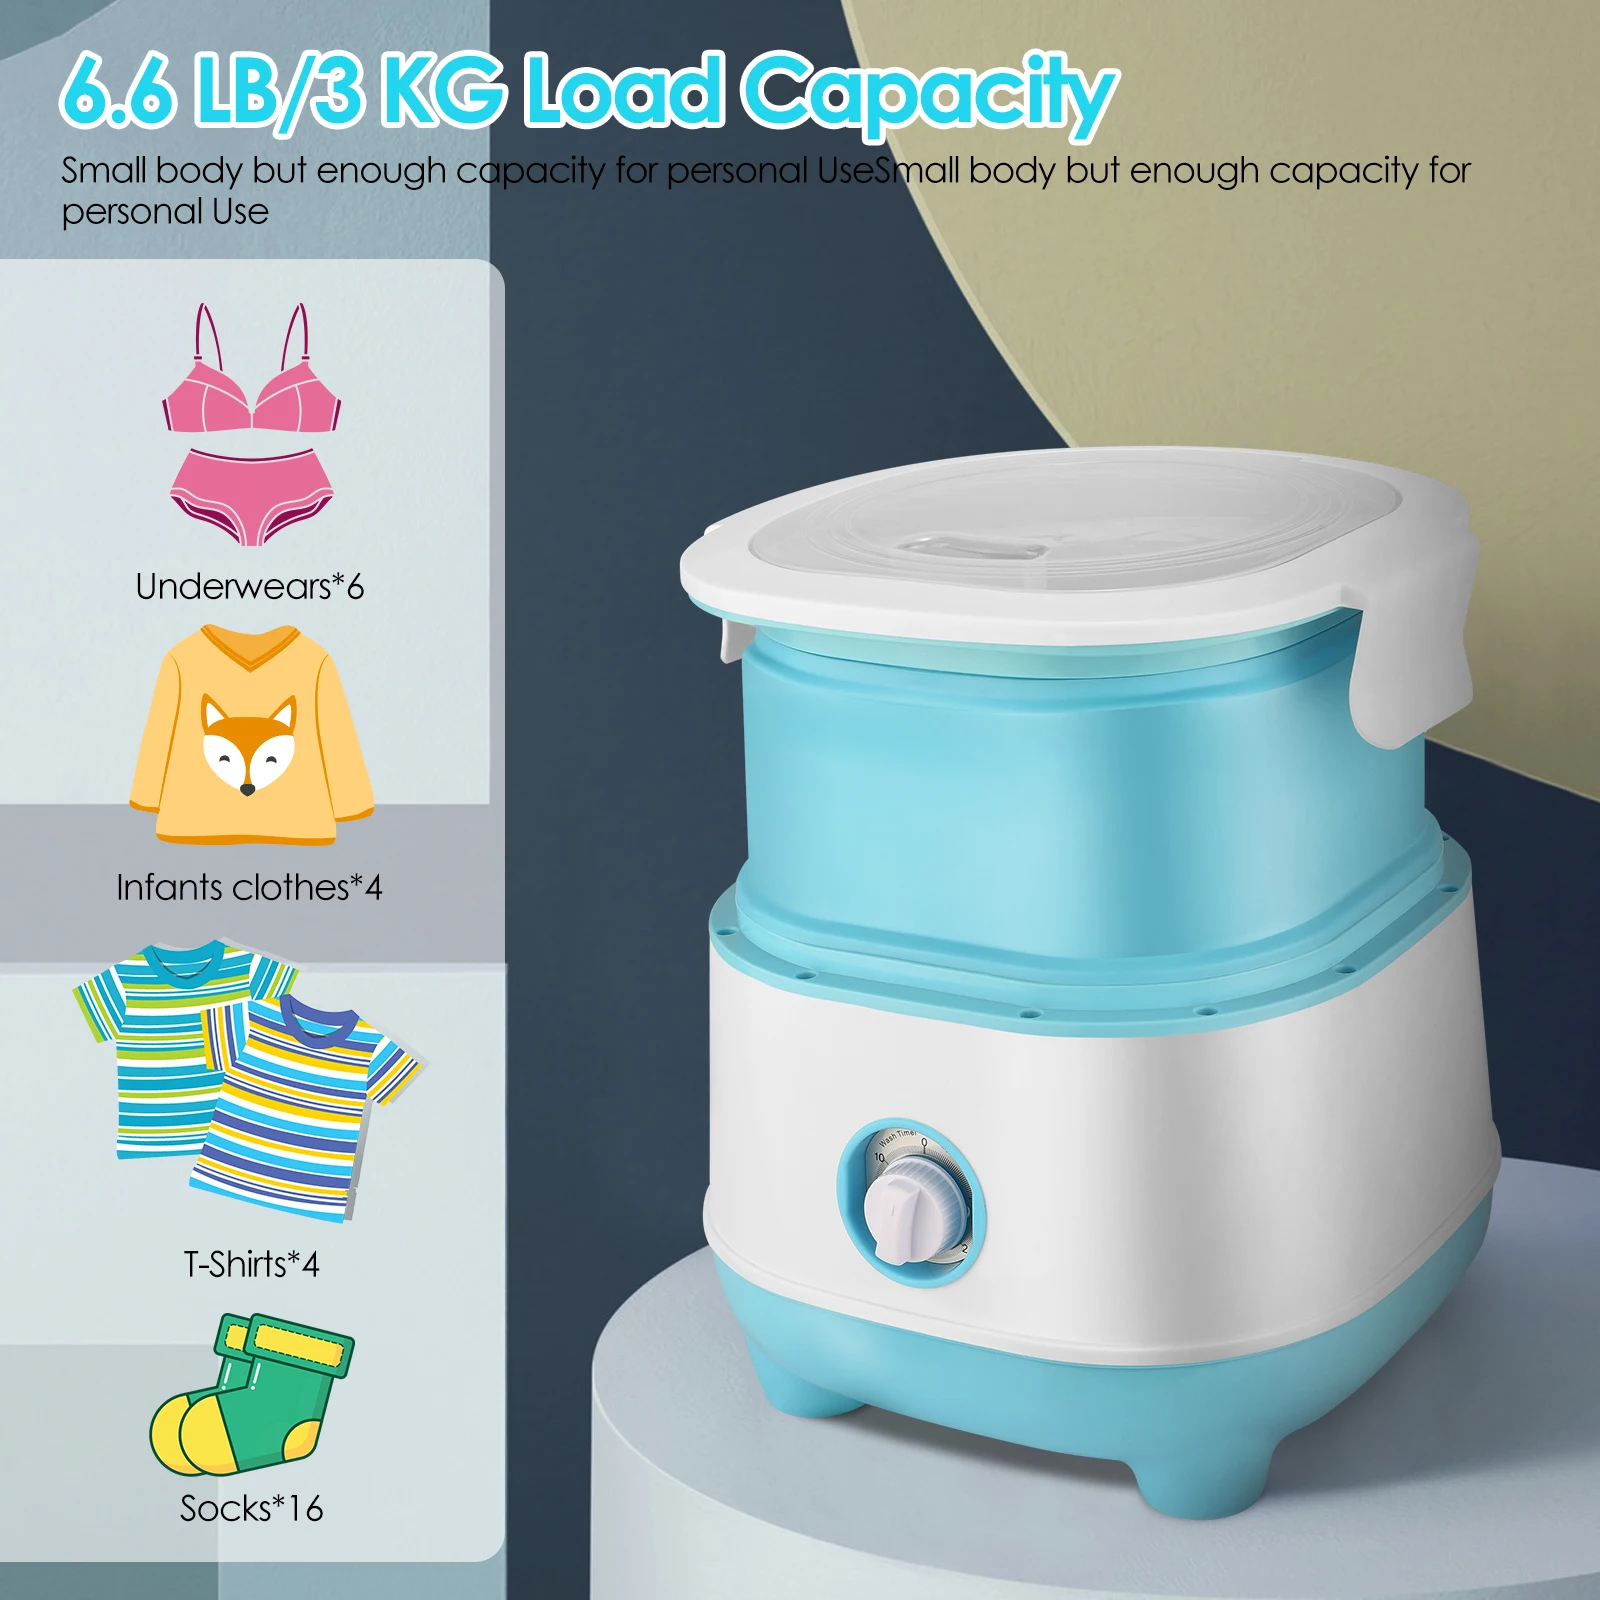 

Foldable Mini Washing Machine Portable 10 Mins Fast Washer For Shirts Underwear Socks Electric Compact Small Laundry Machines